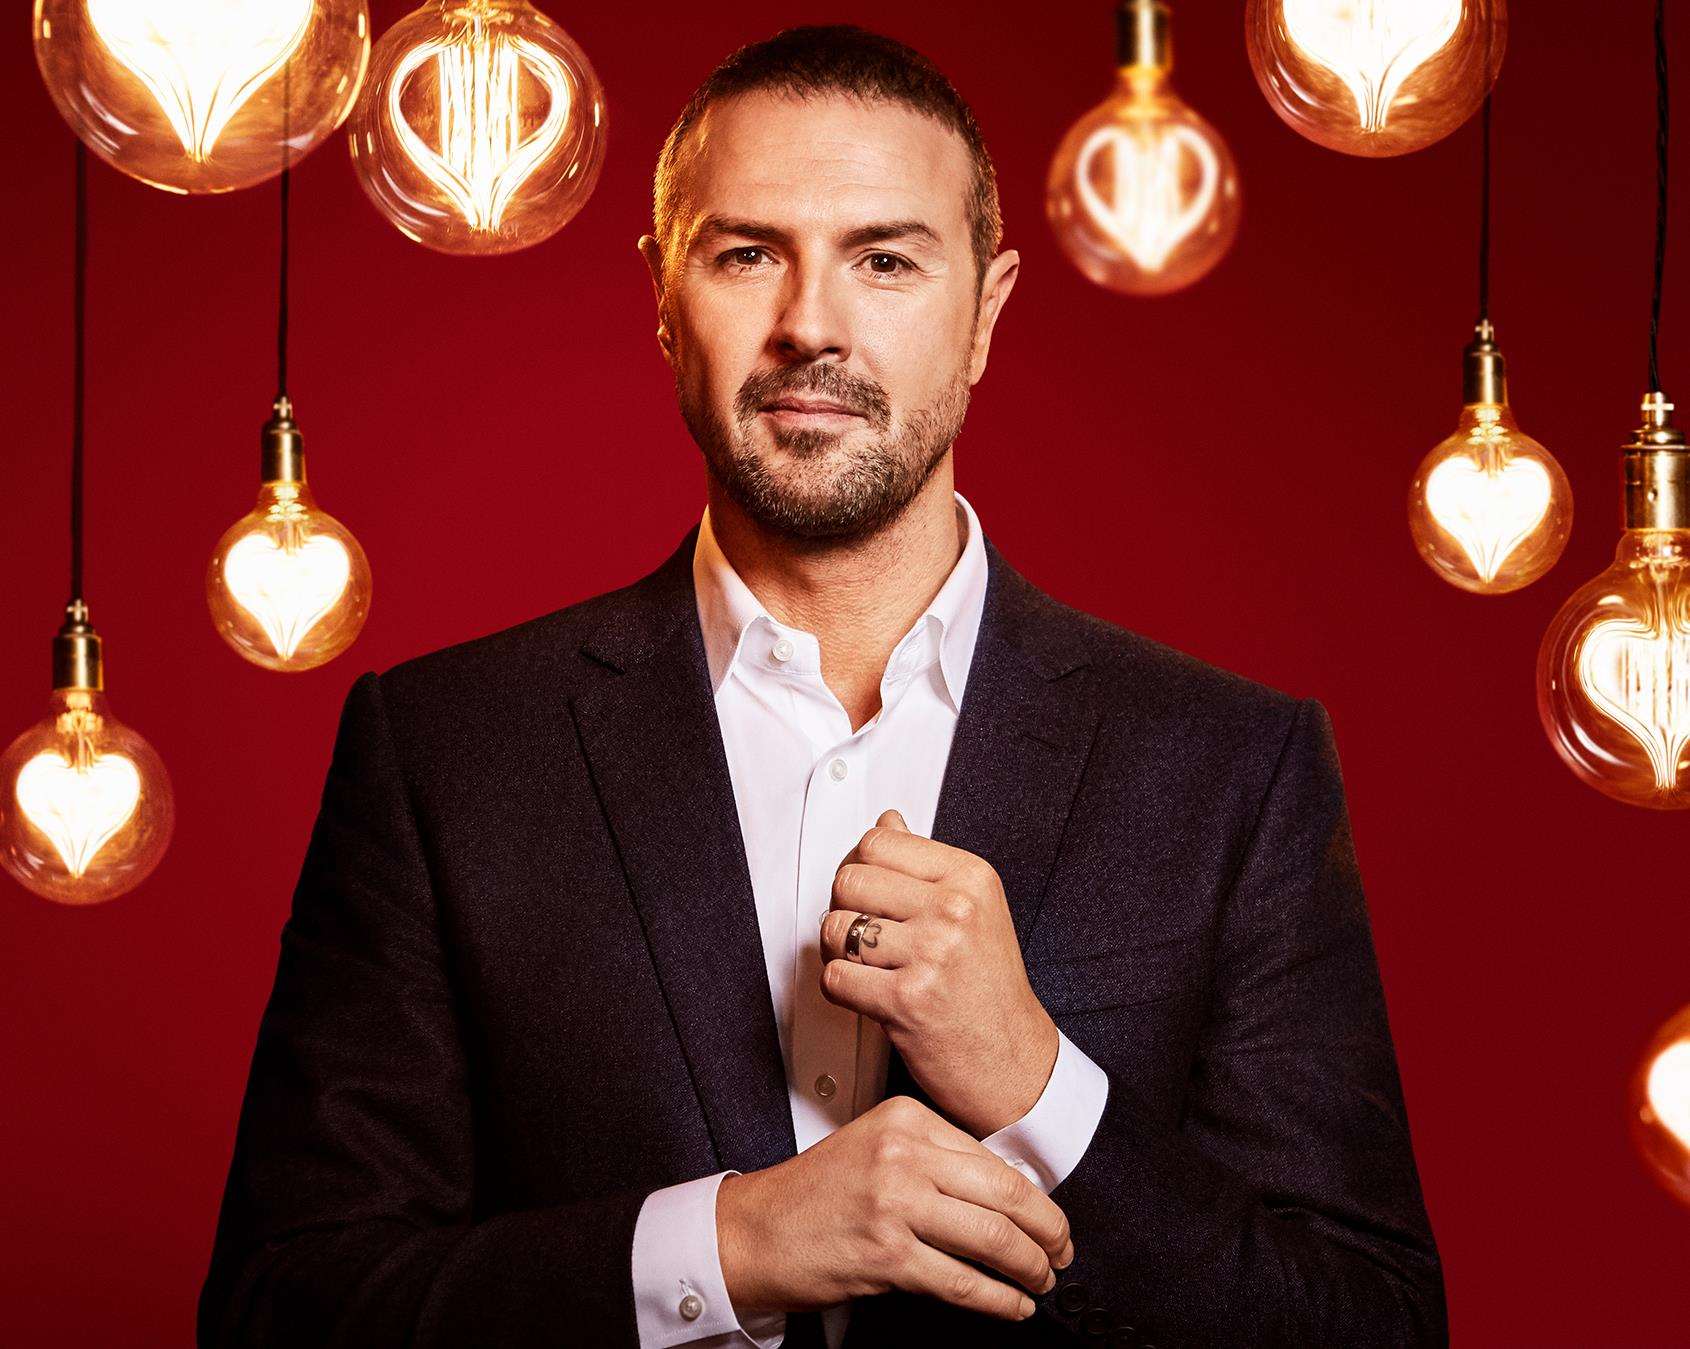 Take Me Out presenter Paddy McGuinness